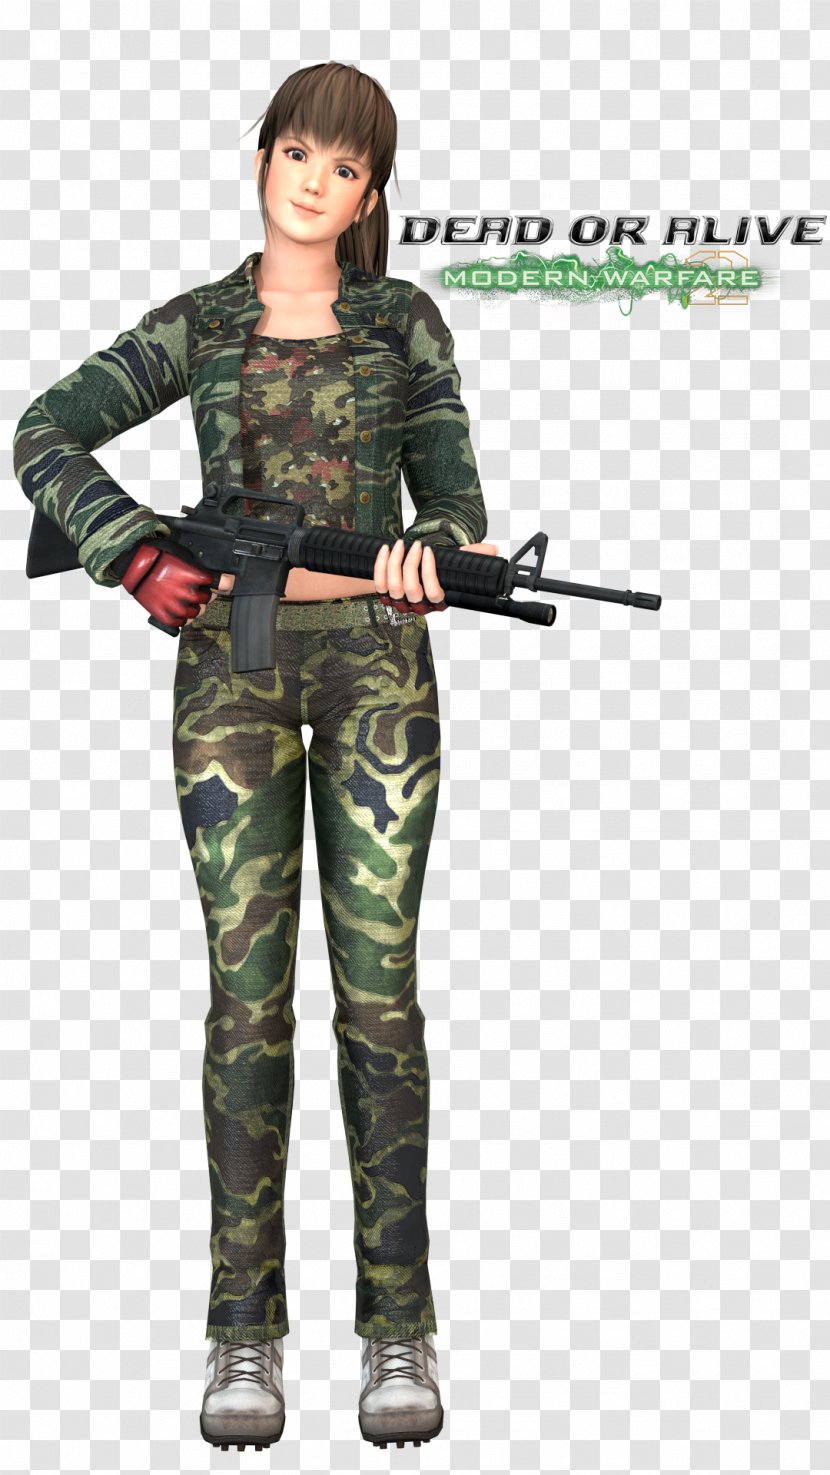 Military Camouflage Dead Or Alive 5 Soldier Infantry Call Of Duty 4: Modern Warfare - Last Round Transparent PNG